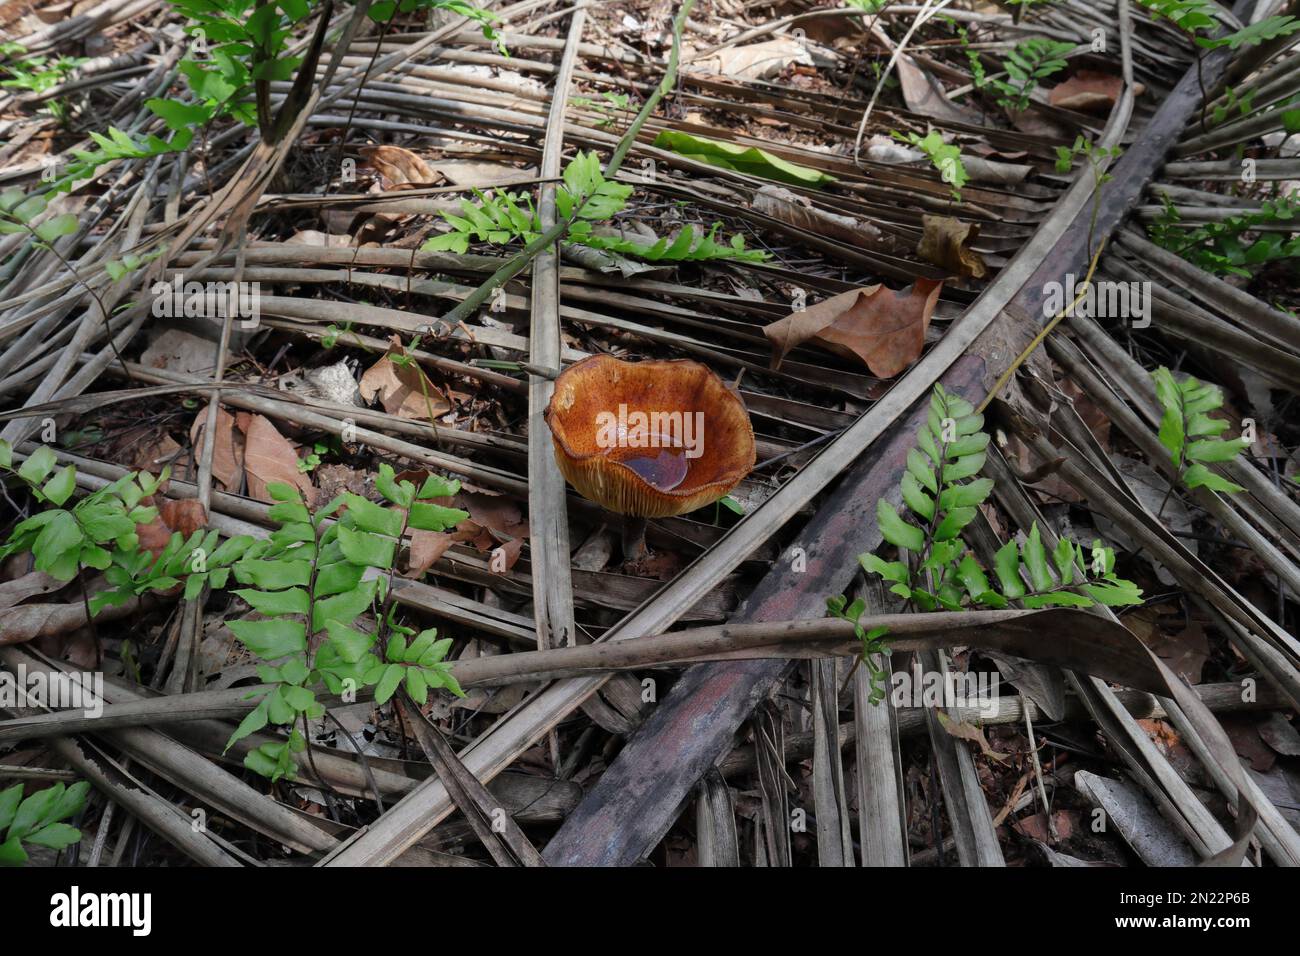 A large orange color funnel shaped mushroom is blooming on the ground with a small amount of rainwater collected on it.The surrounding ground area is Stock Photo